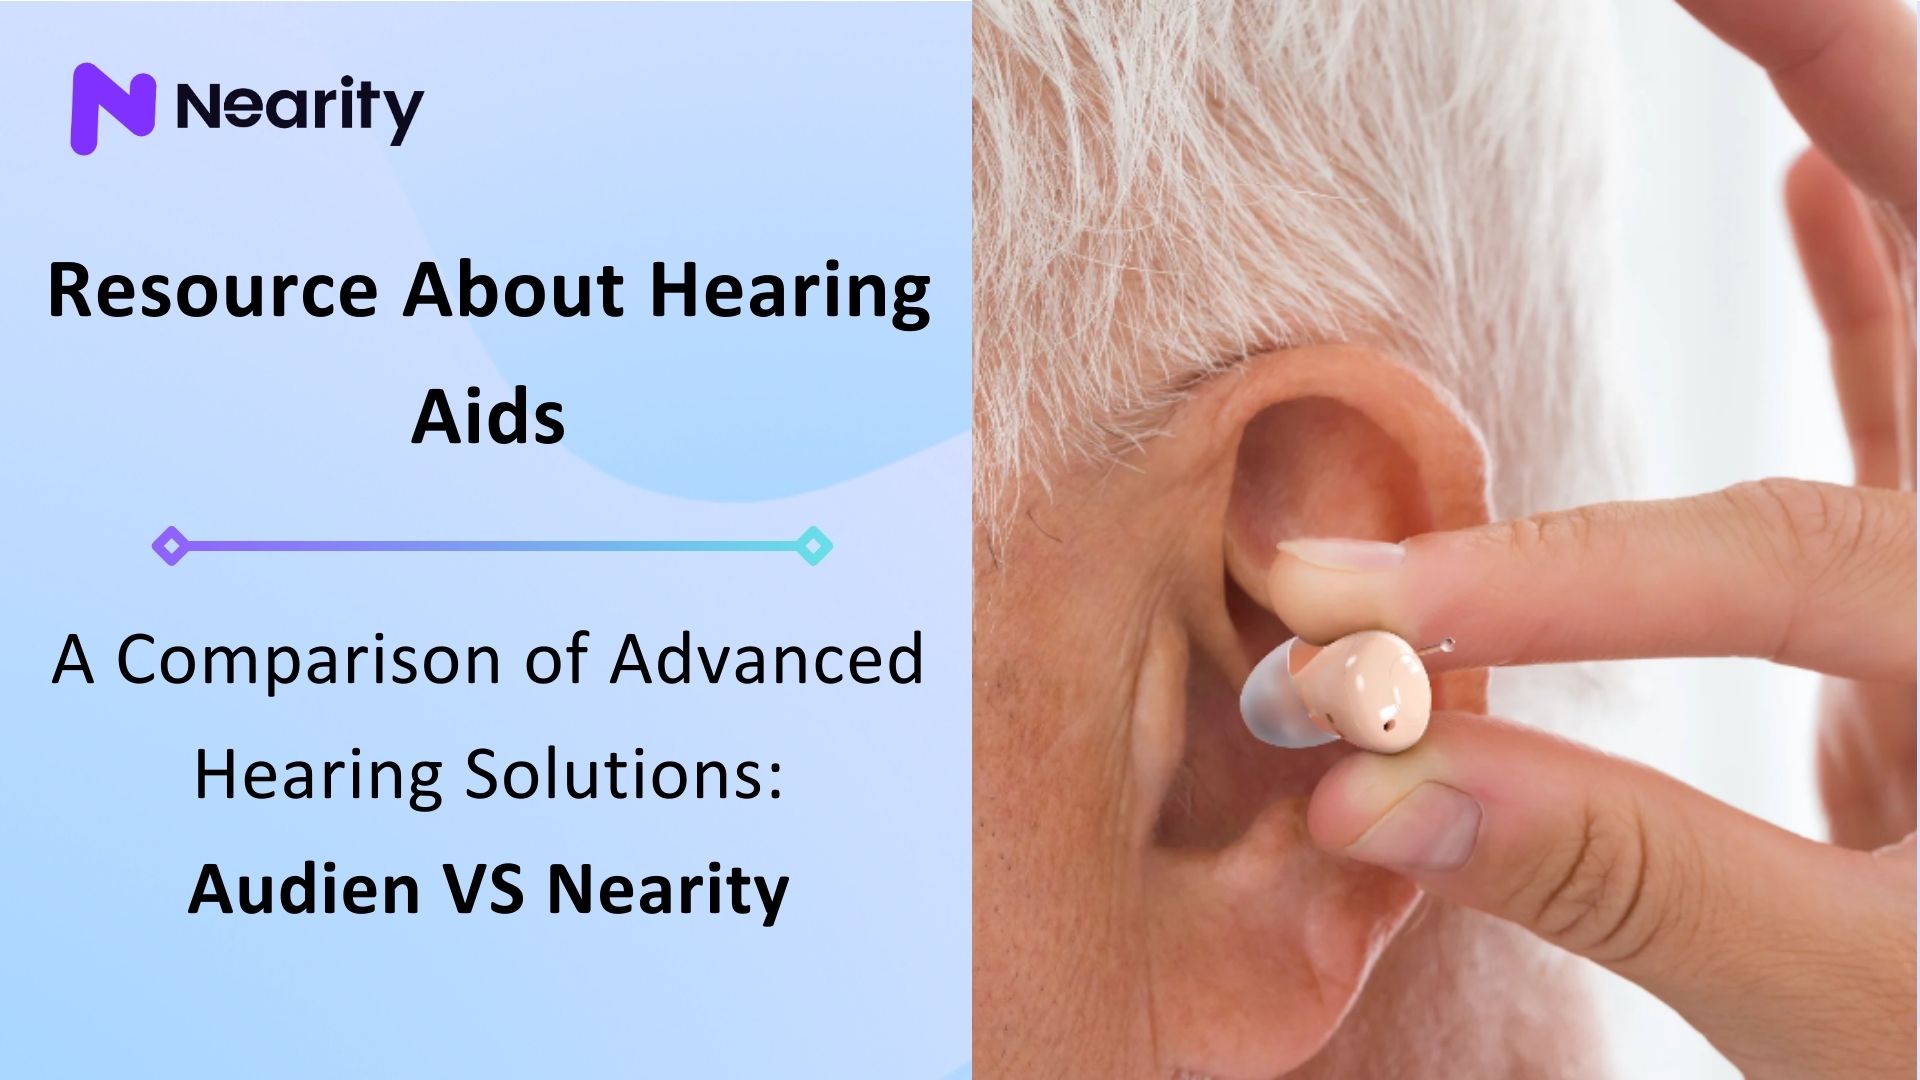 A Comparison of Advanced Hearing Solutions: Audien VS Nearity